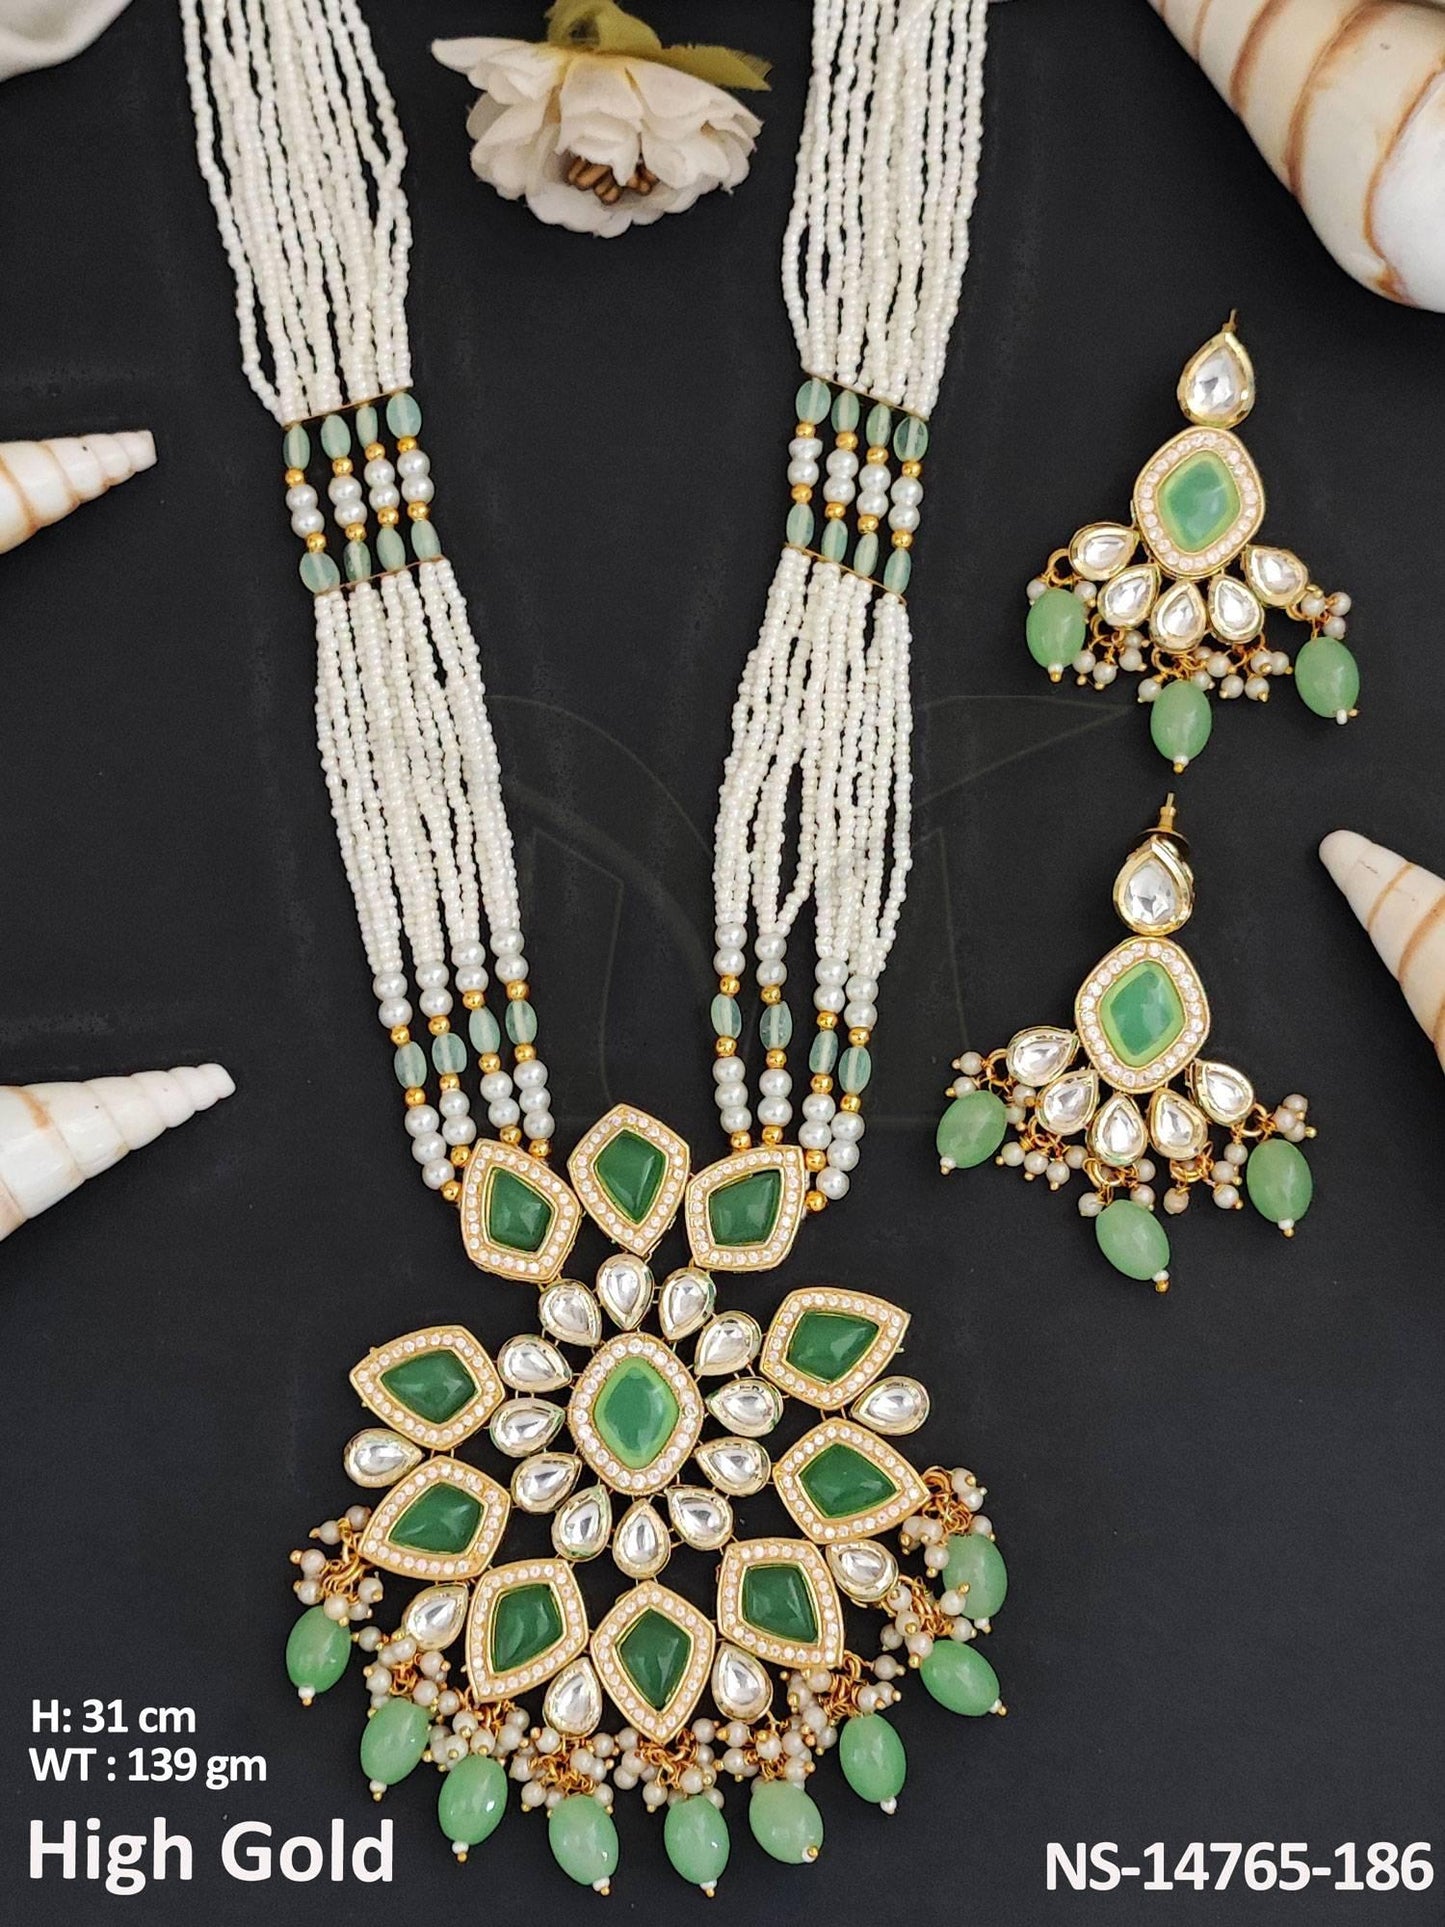 This Kundan Jewellery Fancy Design Long Necklace Set is crafted with high-gold polish on brass metal.